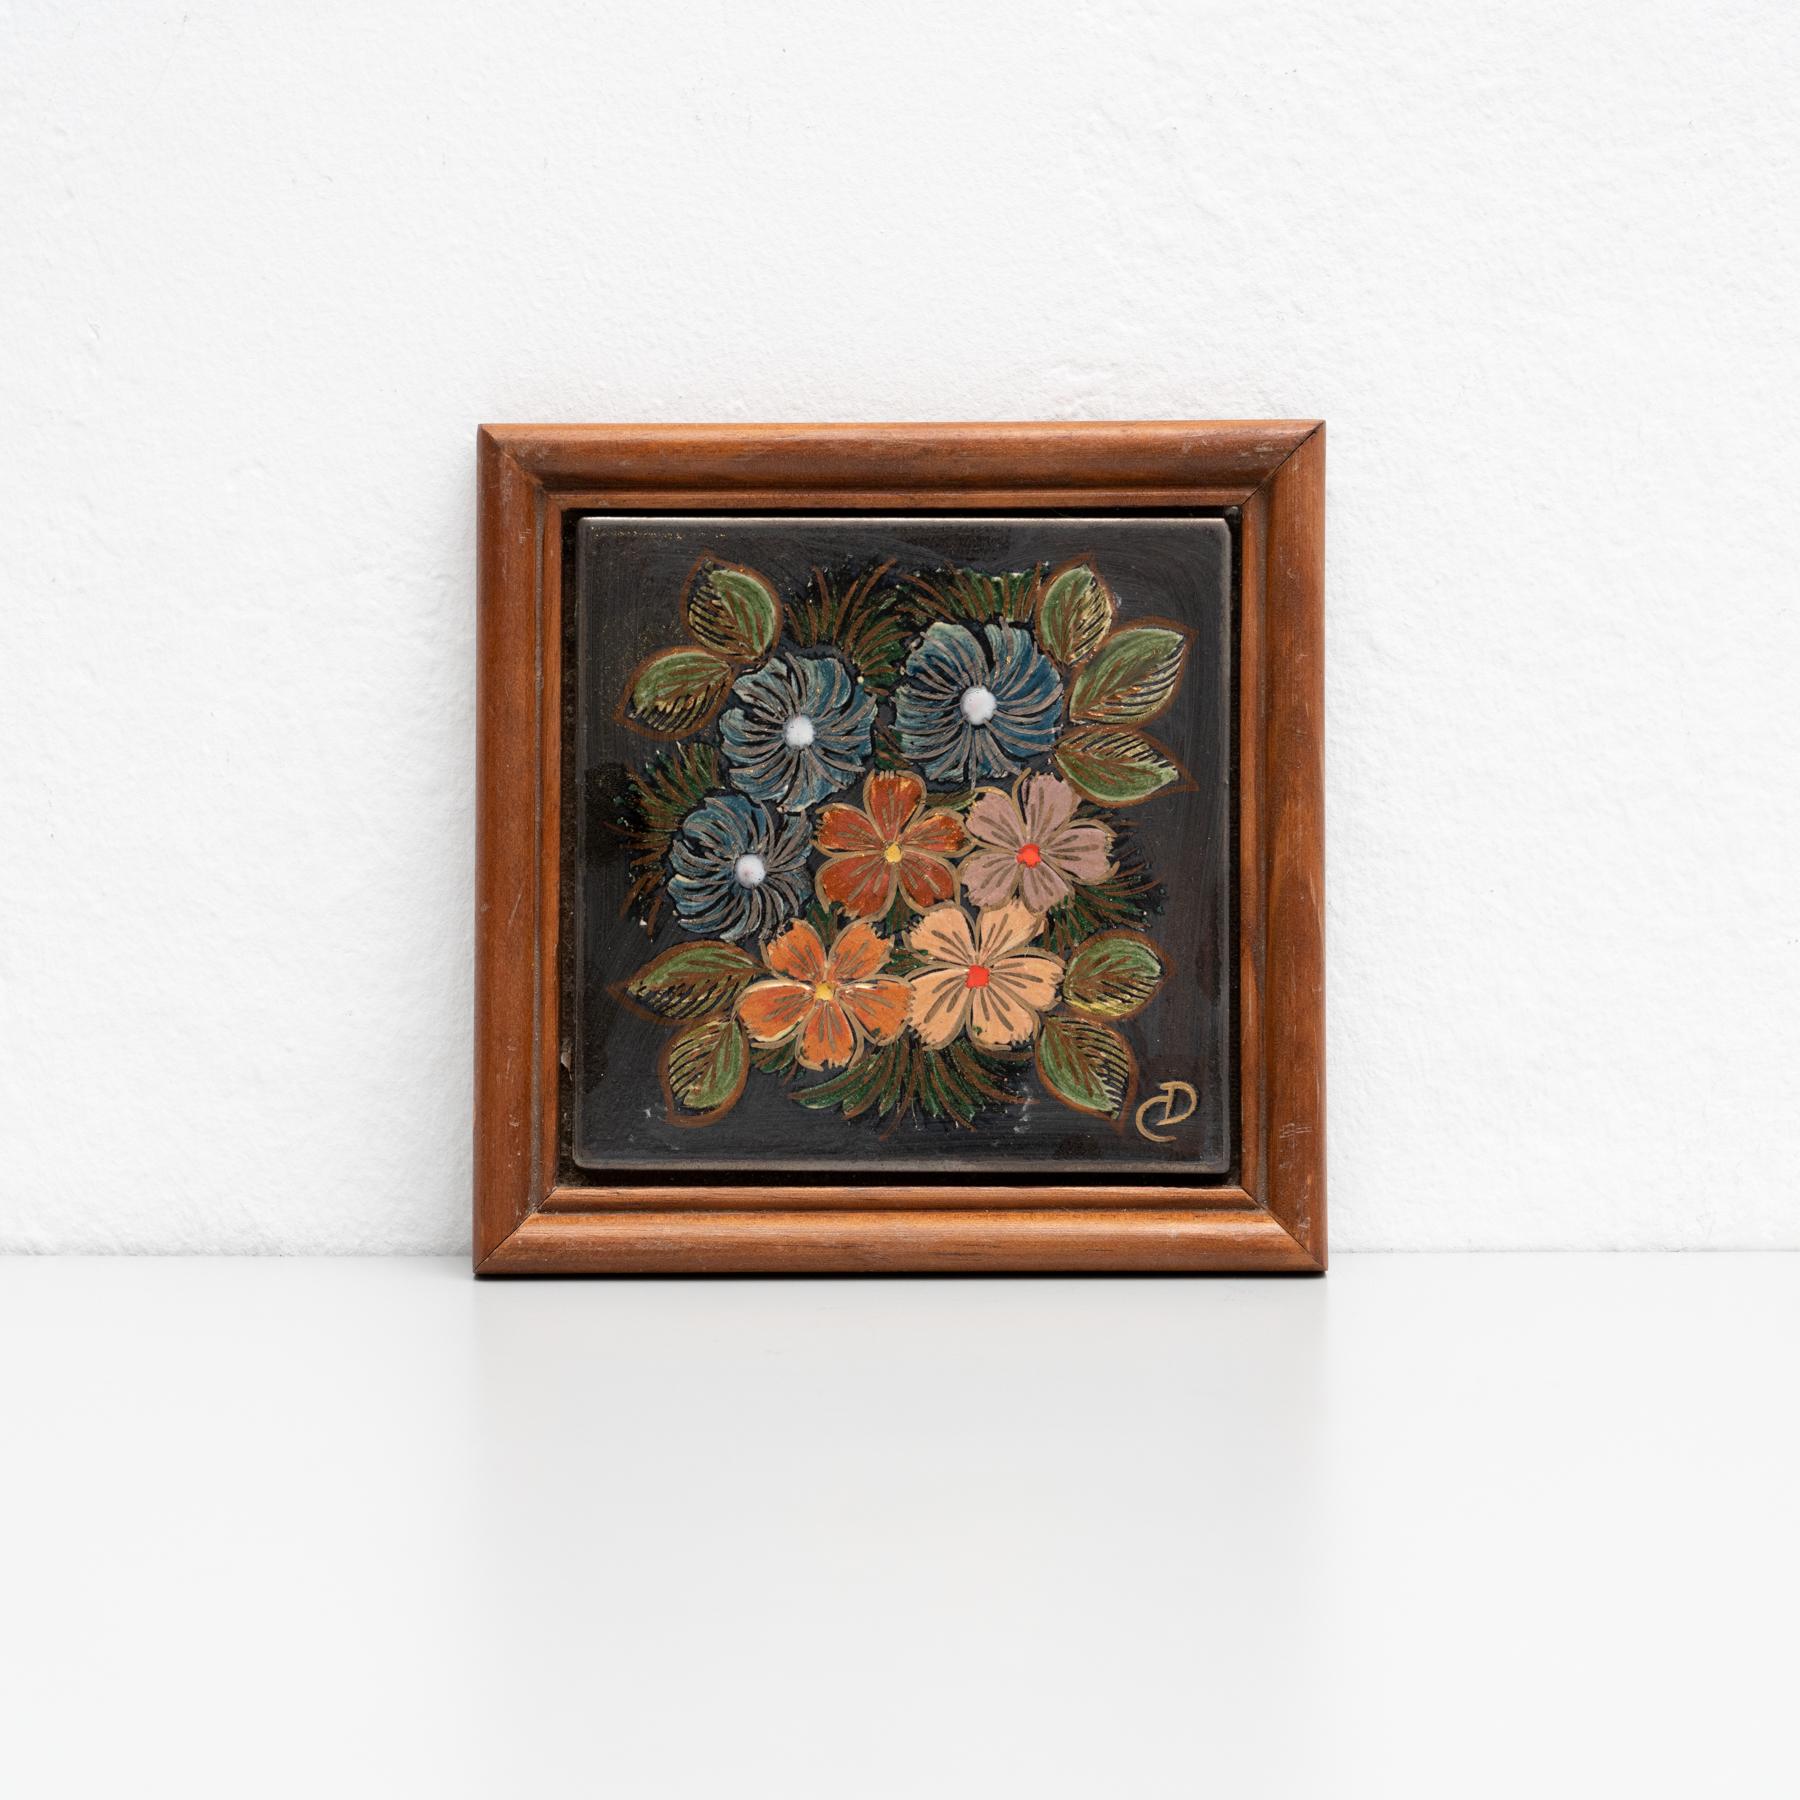 Ceramic hand painted artwork of a floral design by Catalan artist Diaz Costa, circa 1960.
Framed. Signed.

In original condition, with minor wear consistent of age and use, preserving a beautiul patina.